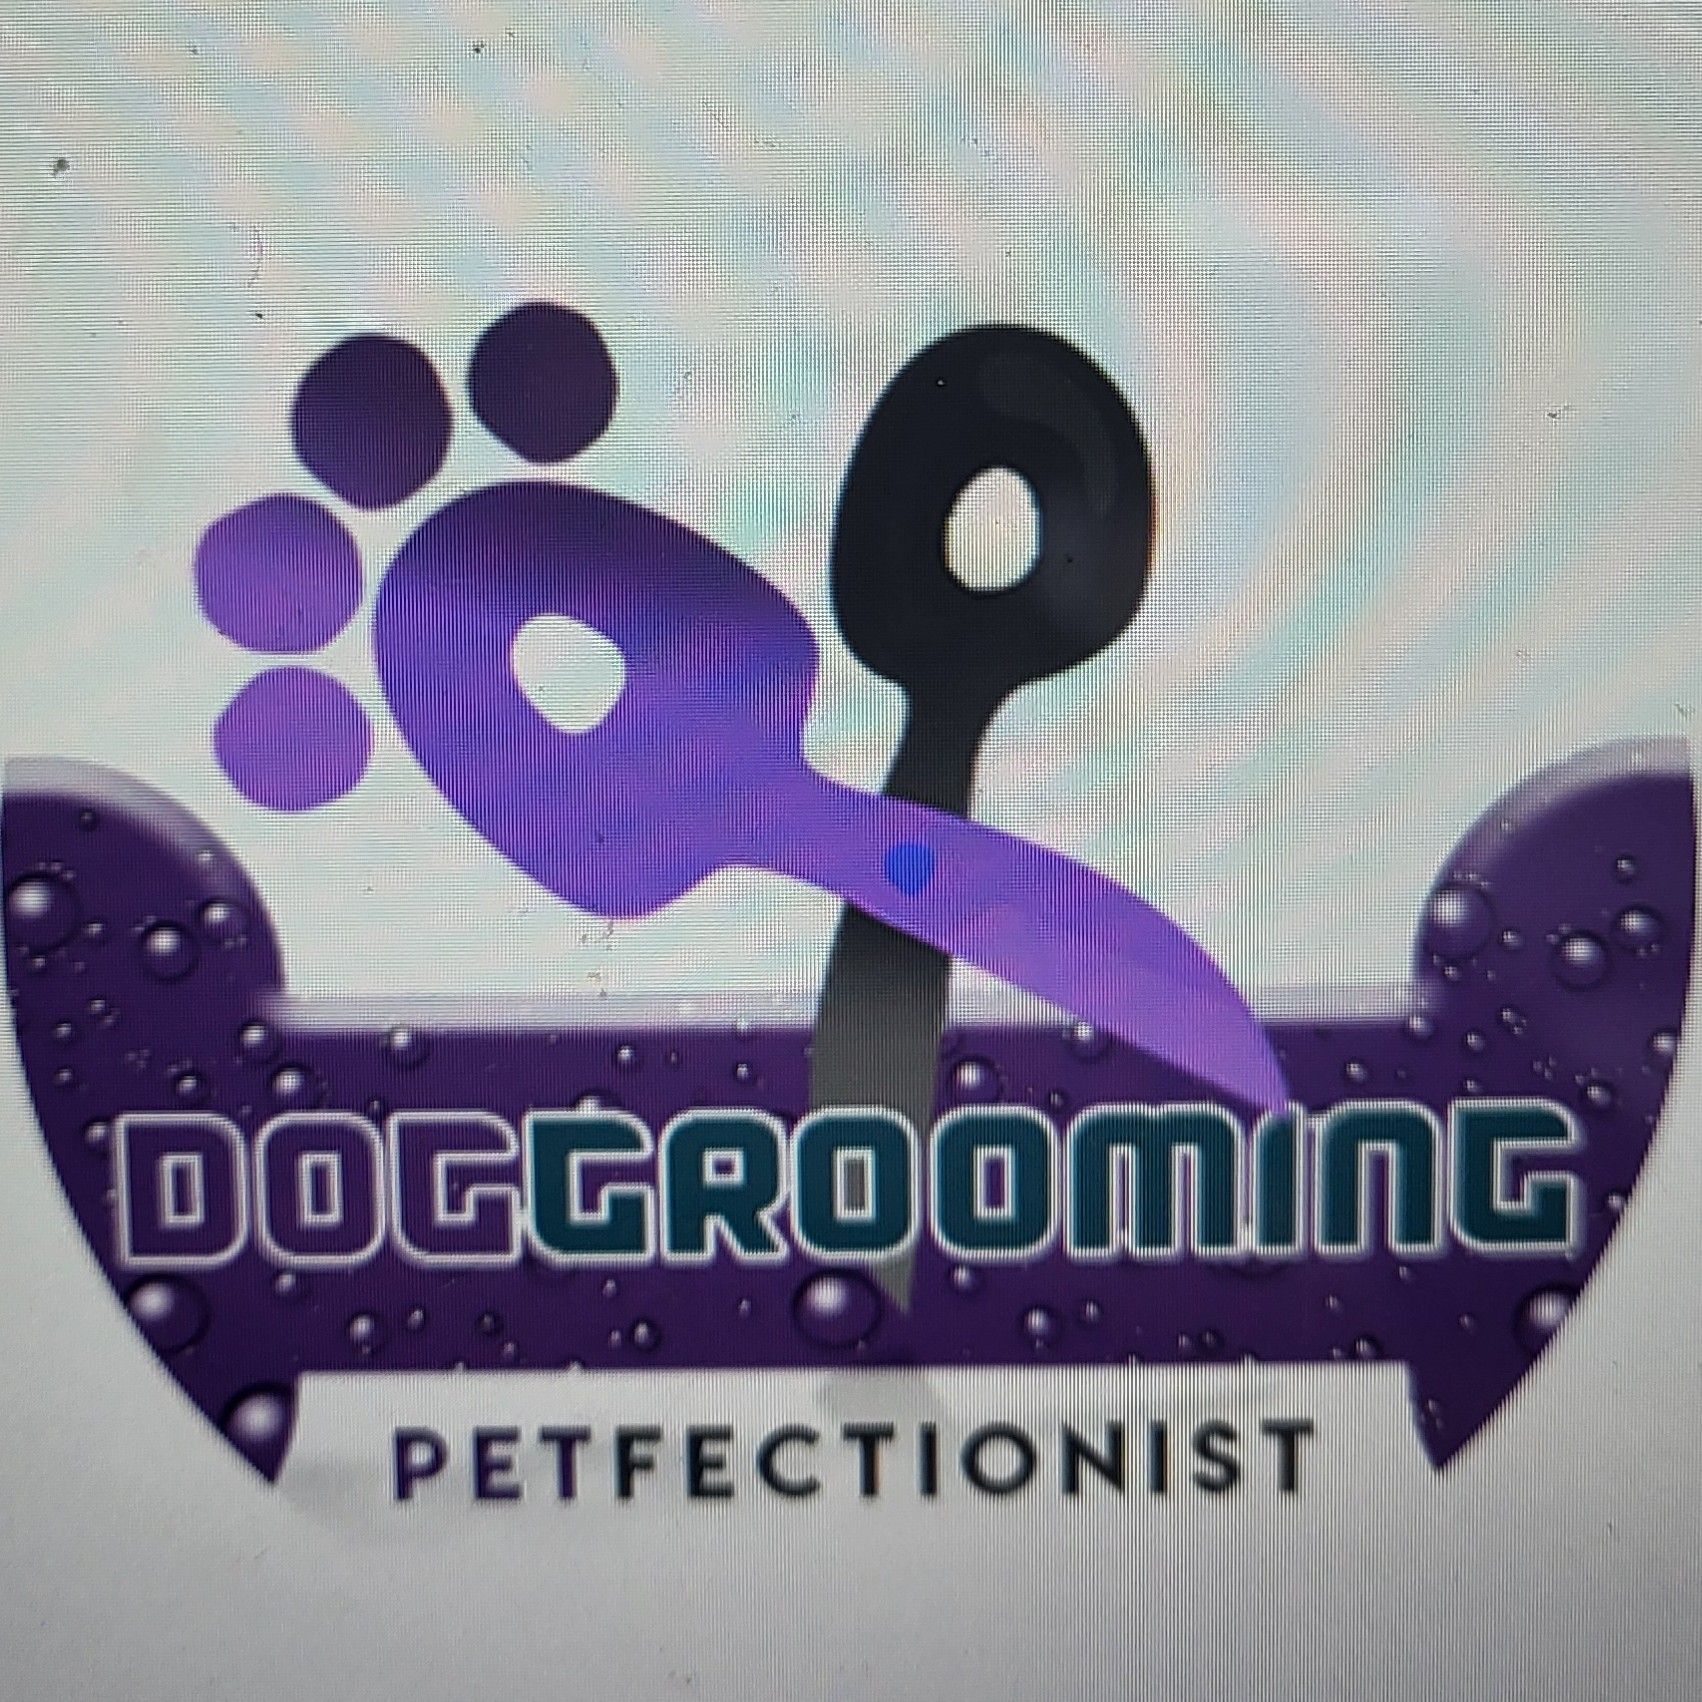 DOGgrooming PETfectionist, 2129 S 10th St, San Jose, 95112